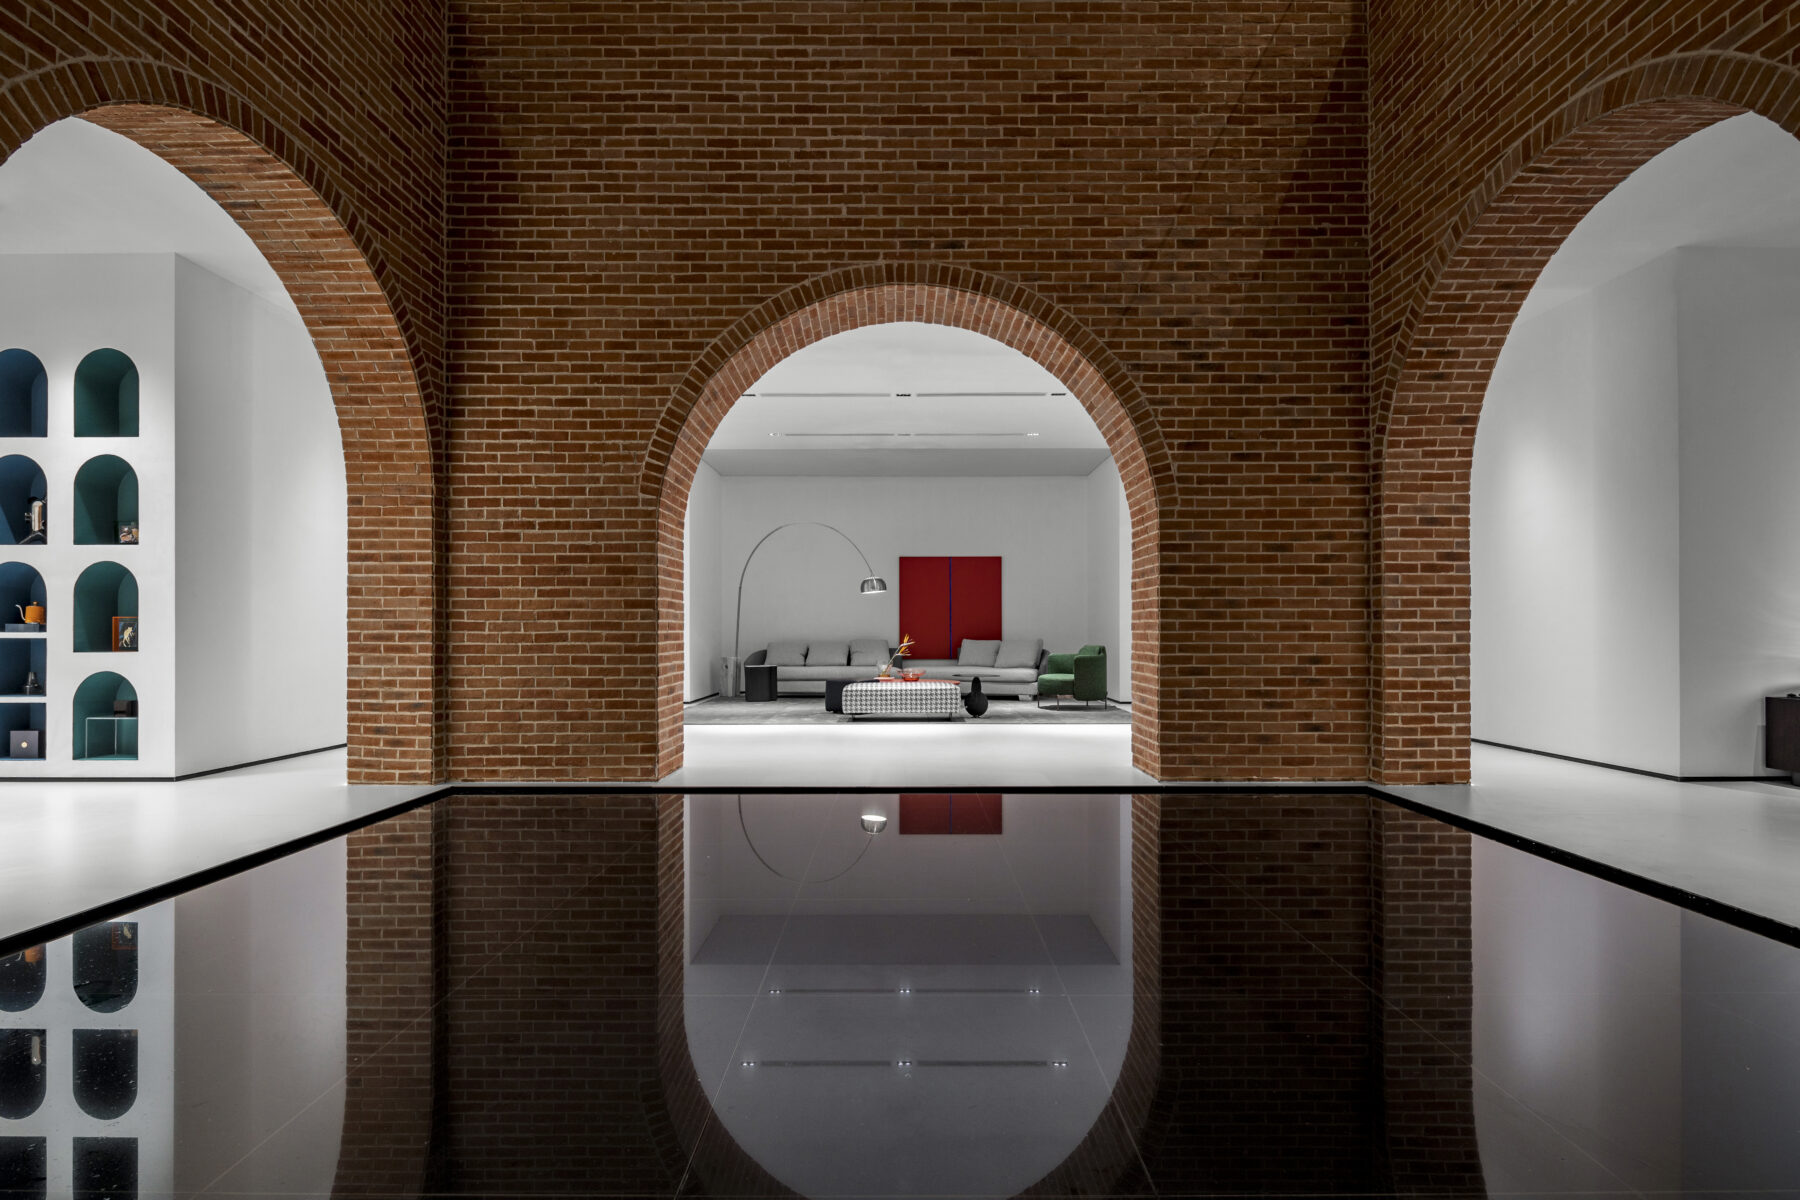 Archisearch GIORIO CASA: The Building of a Peaceful Space, by Wang Zhongli